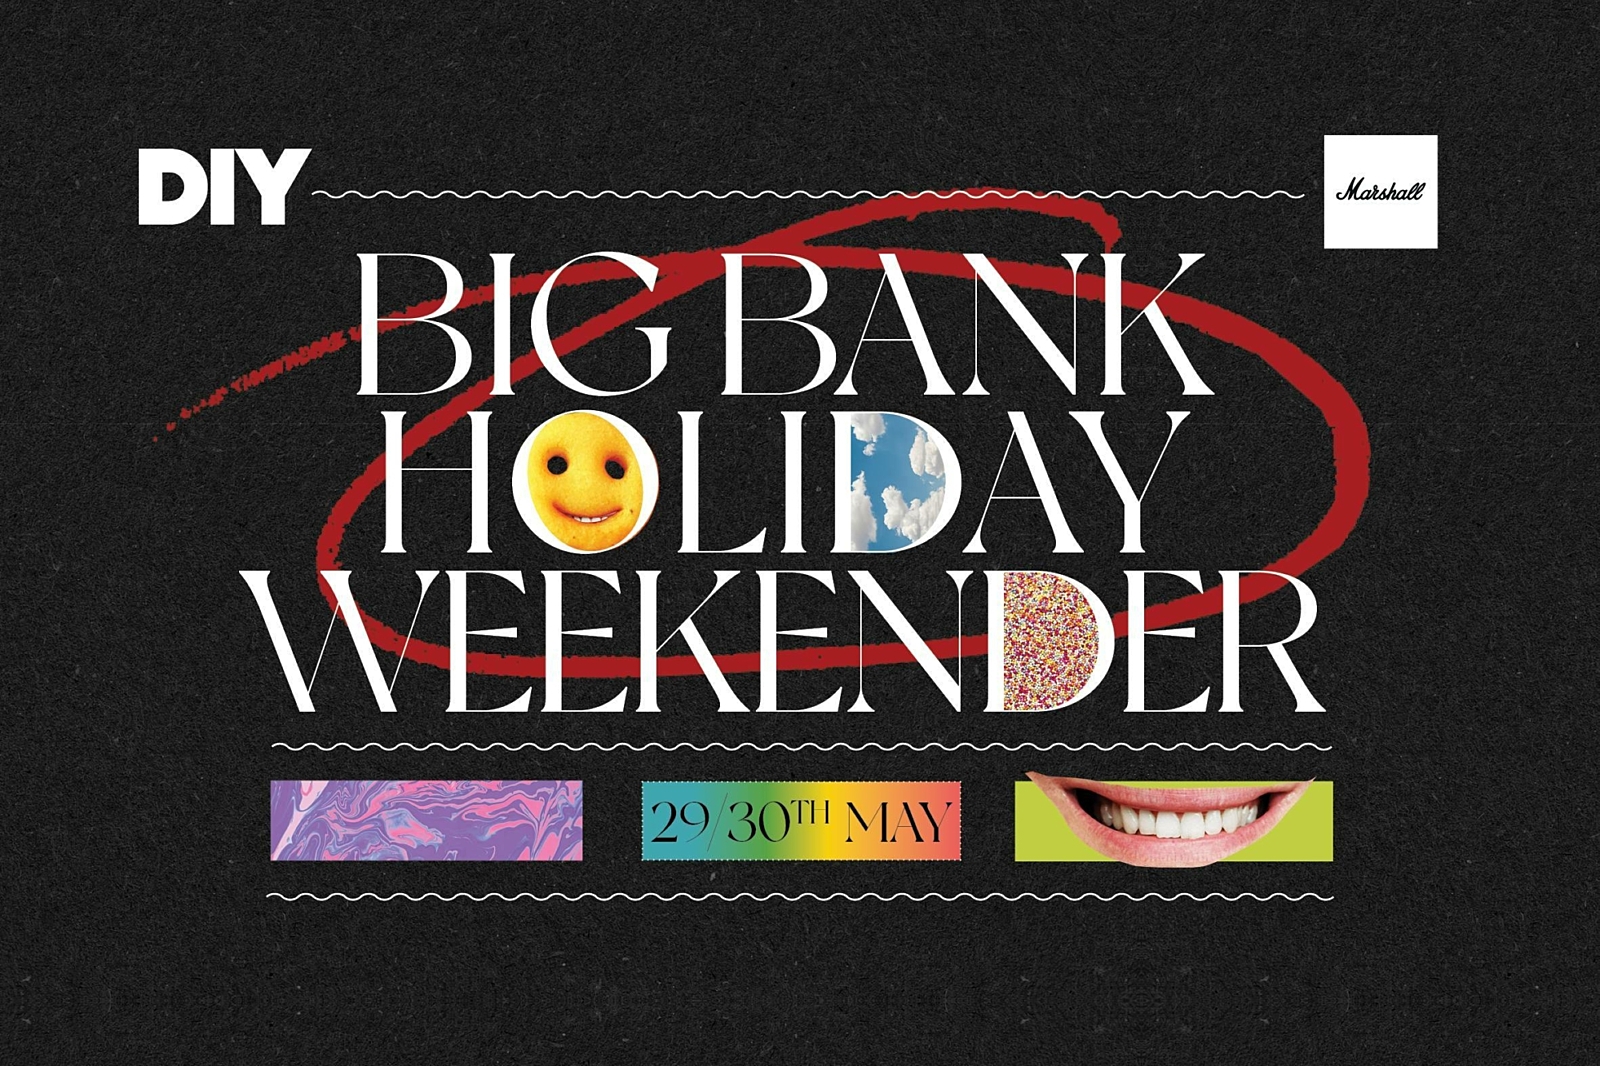 Goat Girl, The Orielles, Do Nothing, Connie Constance & more to play DIY's Big Bank Holiday Weekender